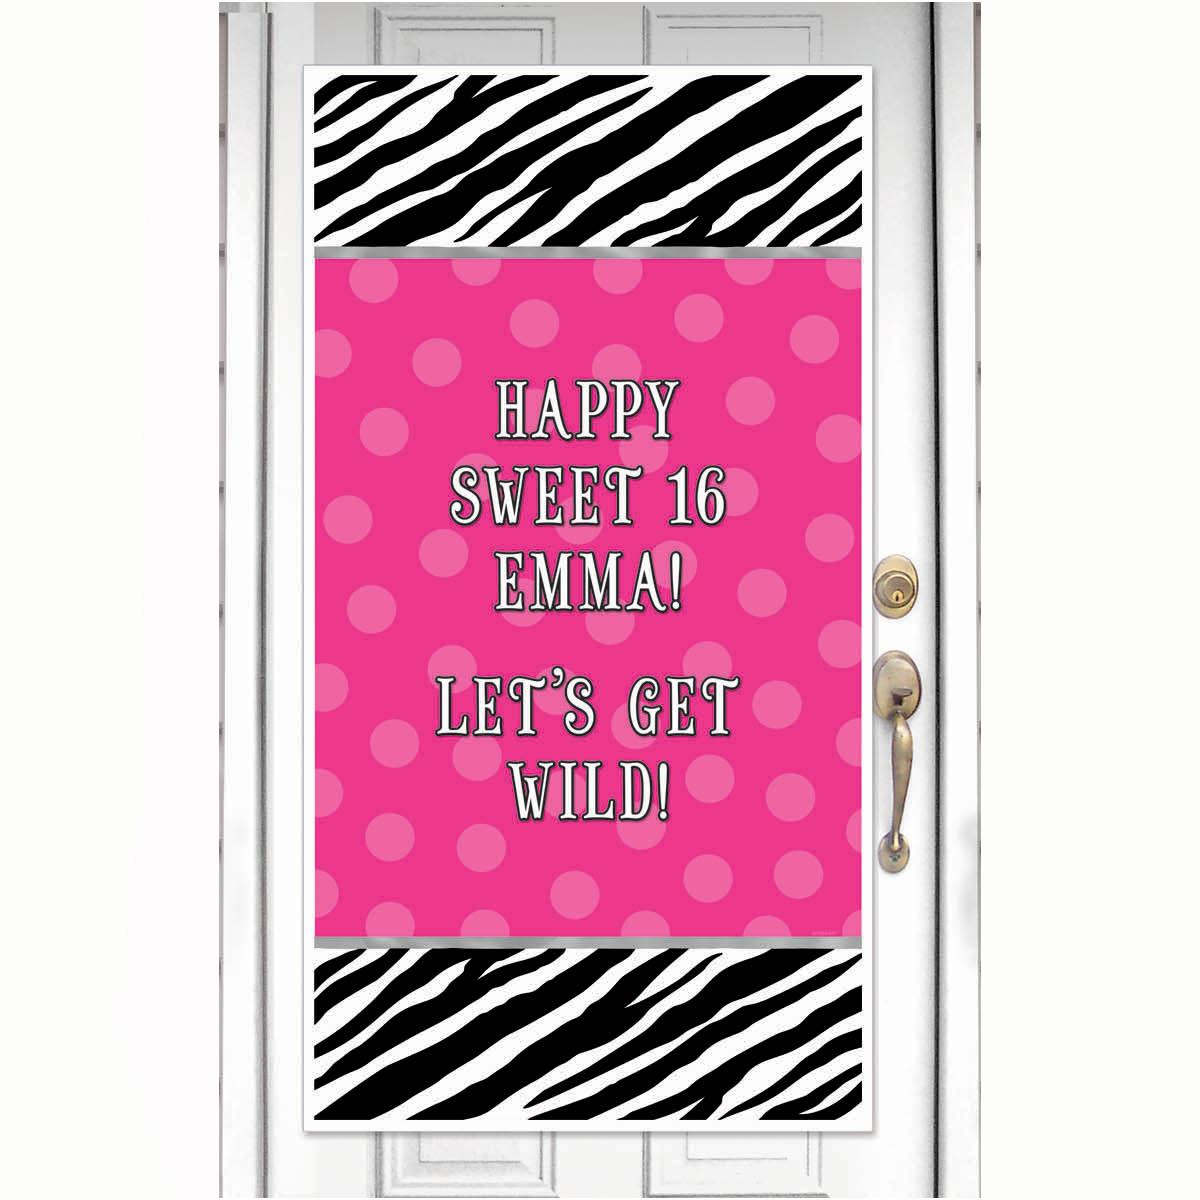 Zebra Party Personalized Door Decoration 65 x 33in Decorations - Party Centre